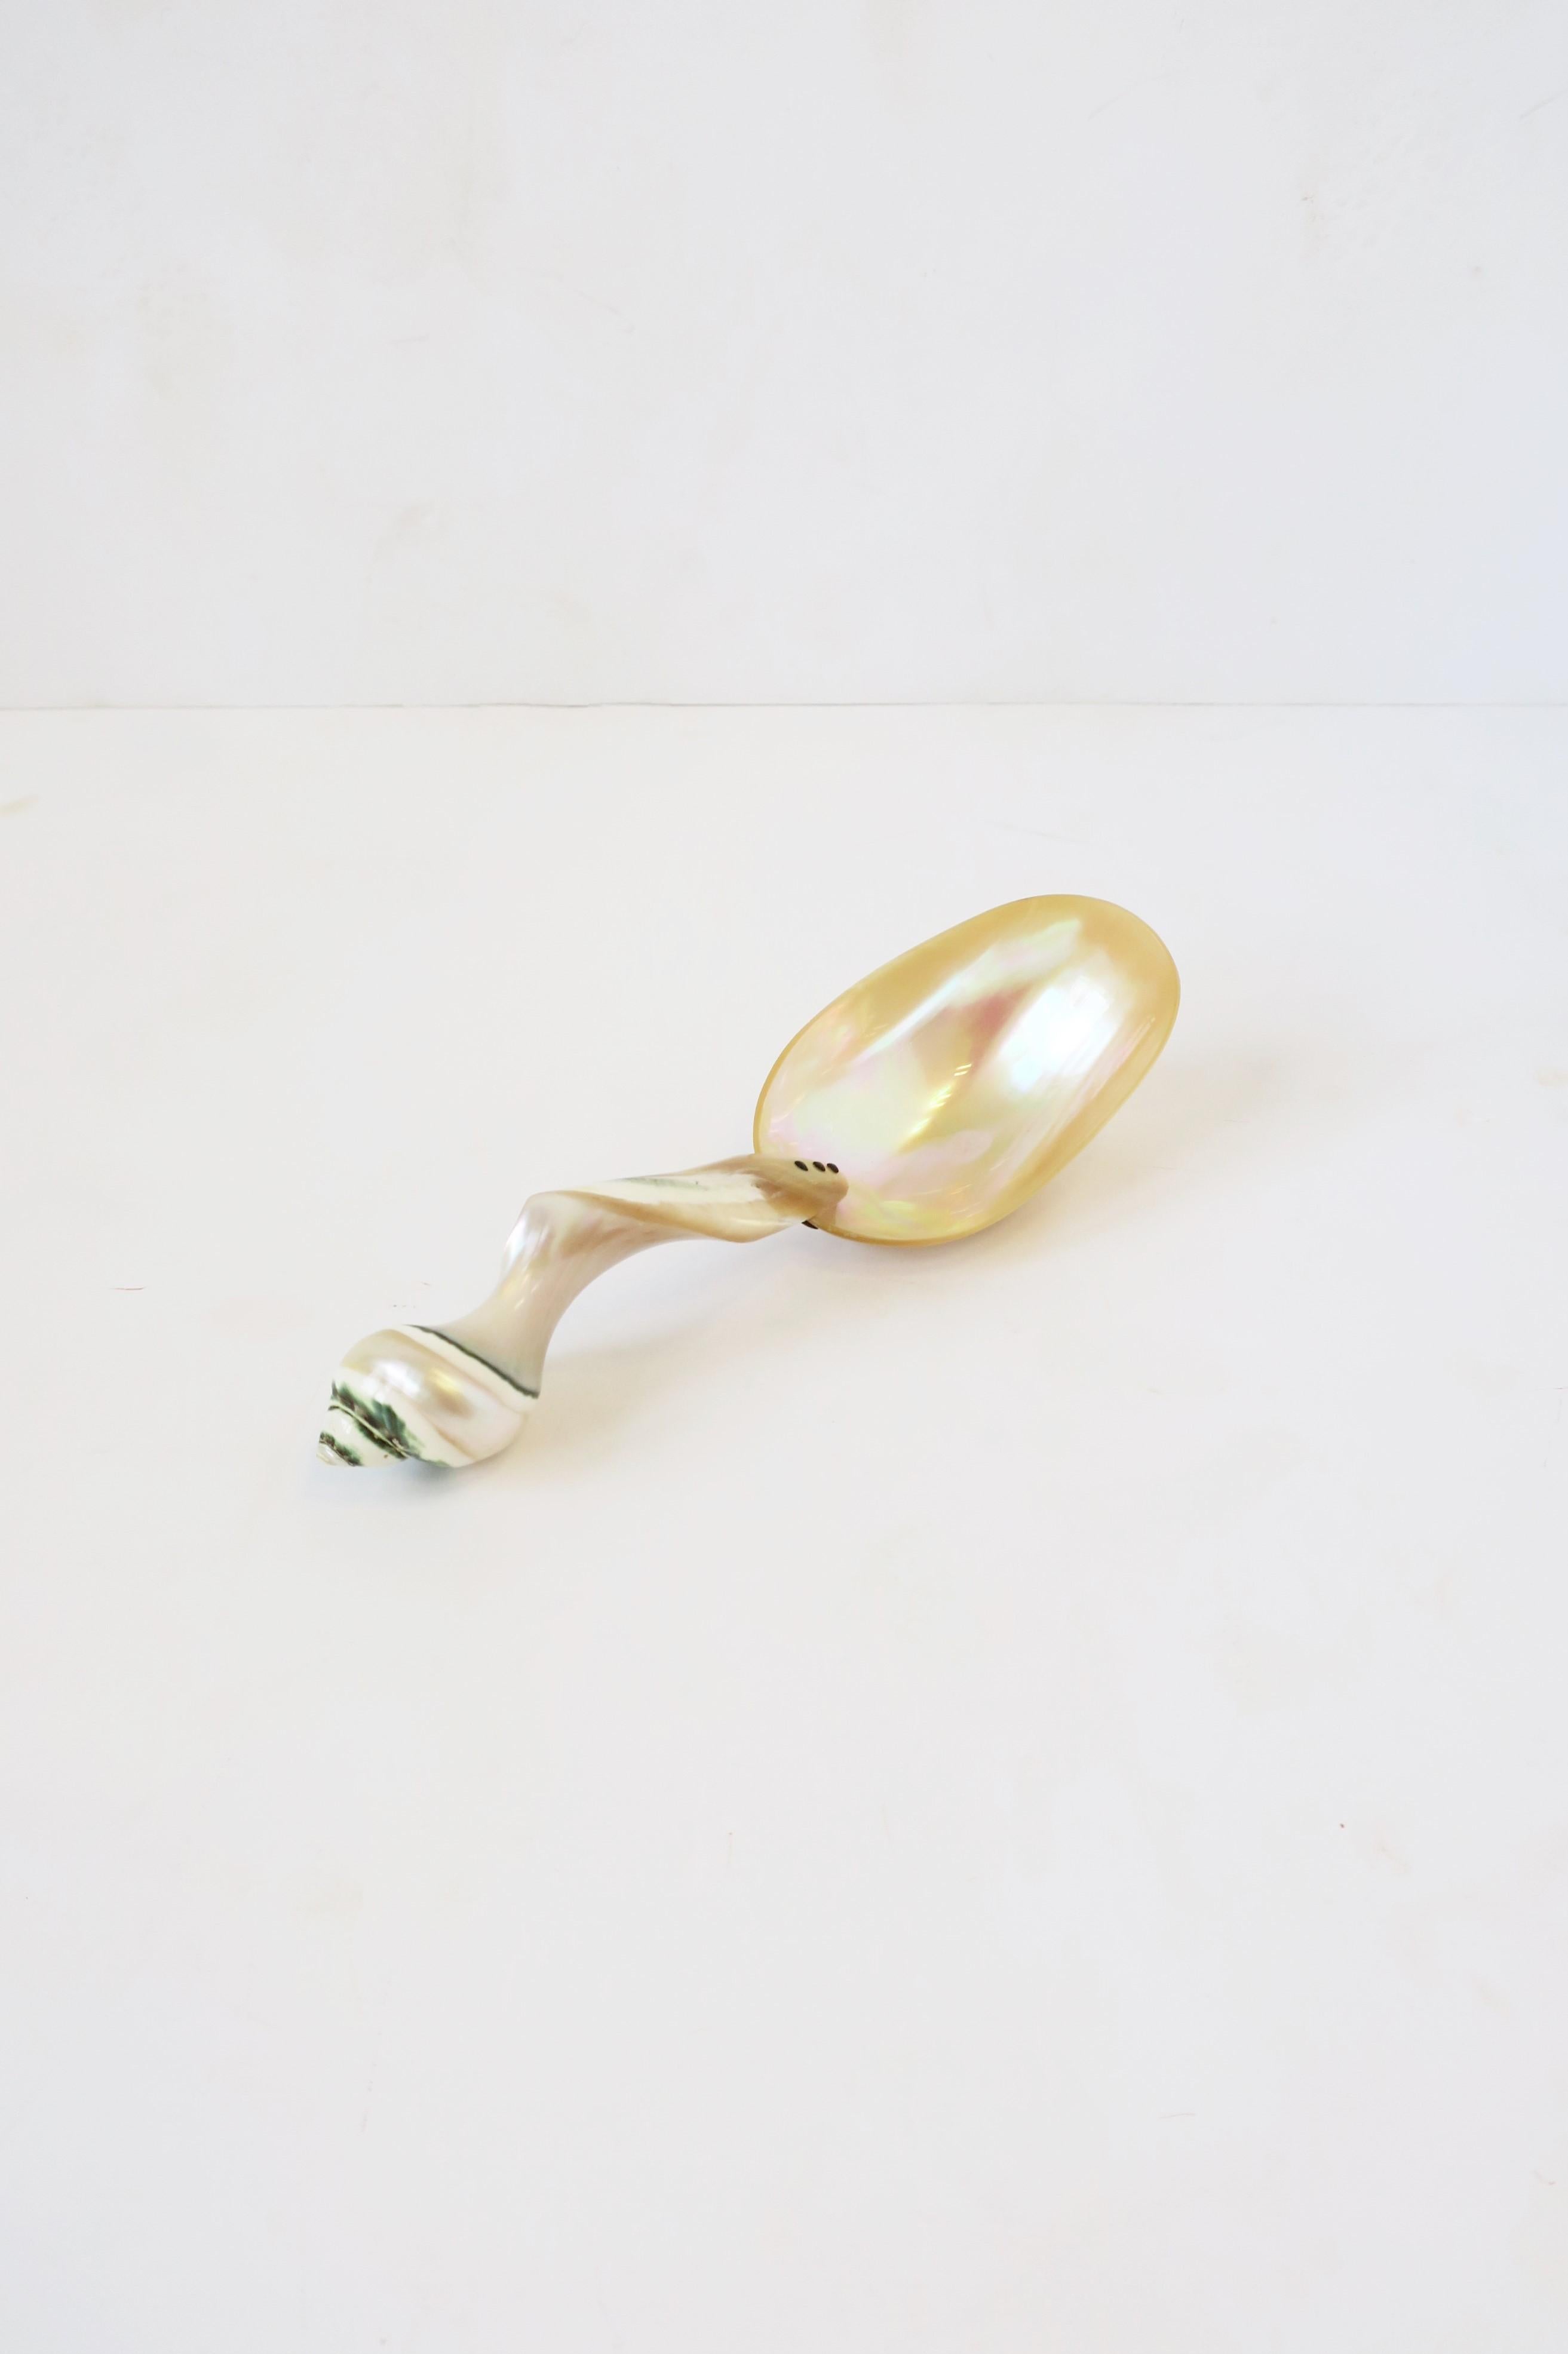 A very beautiful handmade mother of pearl spoon in the organic modern style, circa 20th century. Spoon is made entirely of mother of pearl seashell, carved, and polished smooth. A great serving spoon for summer or holiday dinning or entertaining.